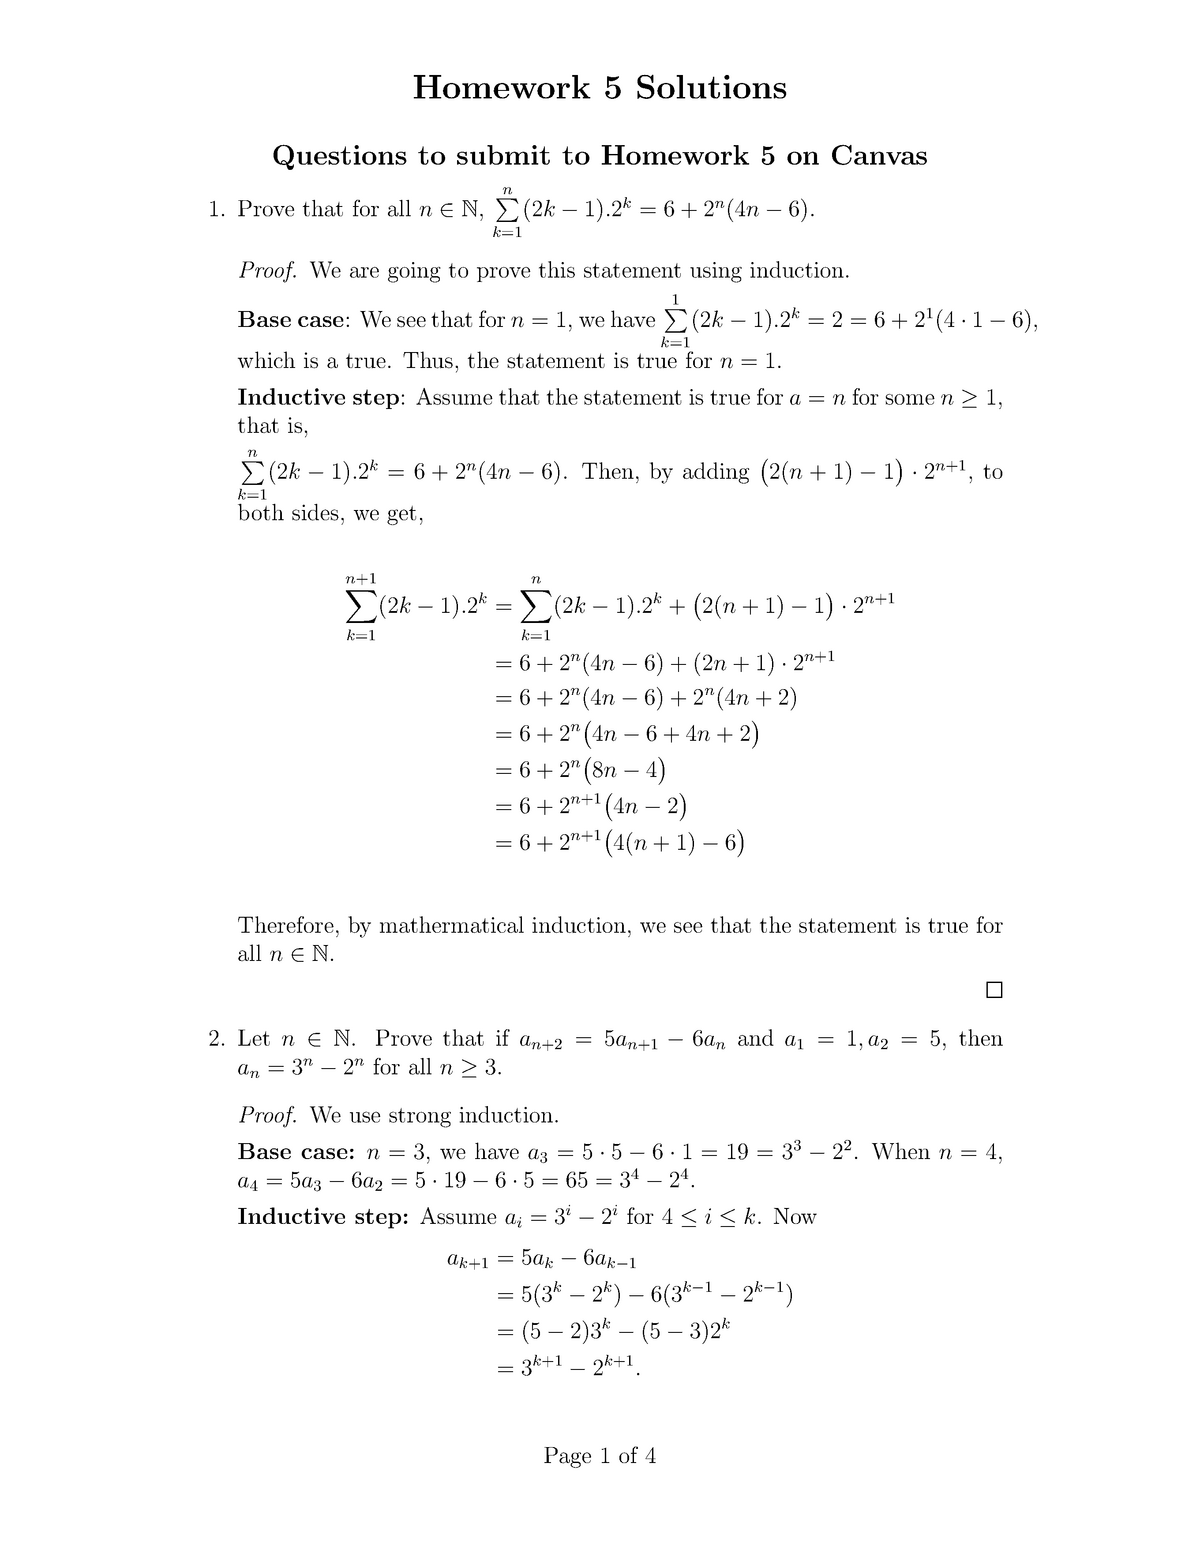 math-220-fall-21-homework-5-solutions-questions-to-submit-to-homework